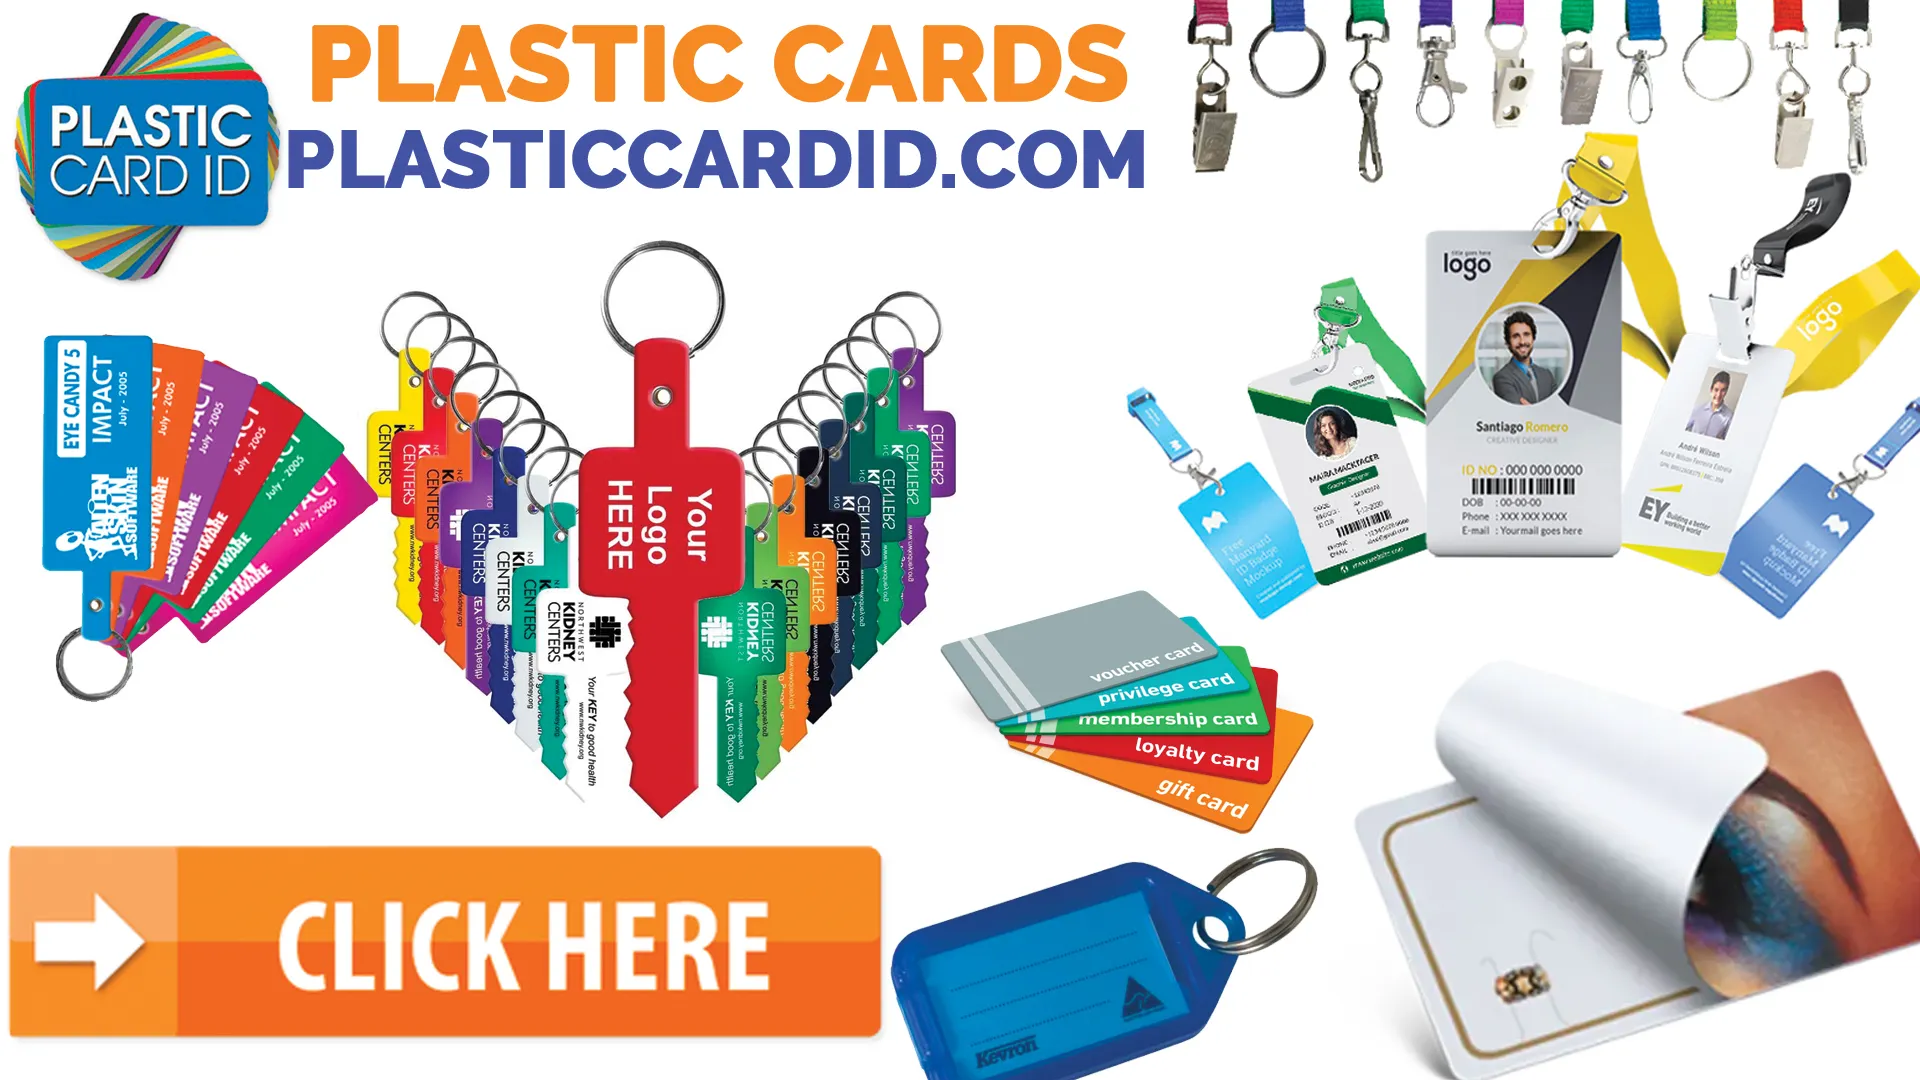 Step-by-Step: The Simple Order Process at Plastic Card ID




